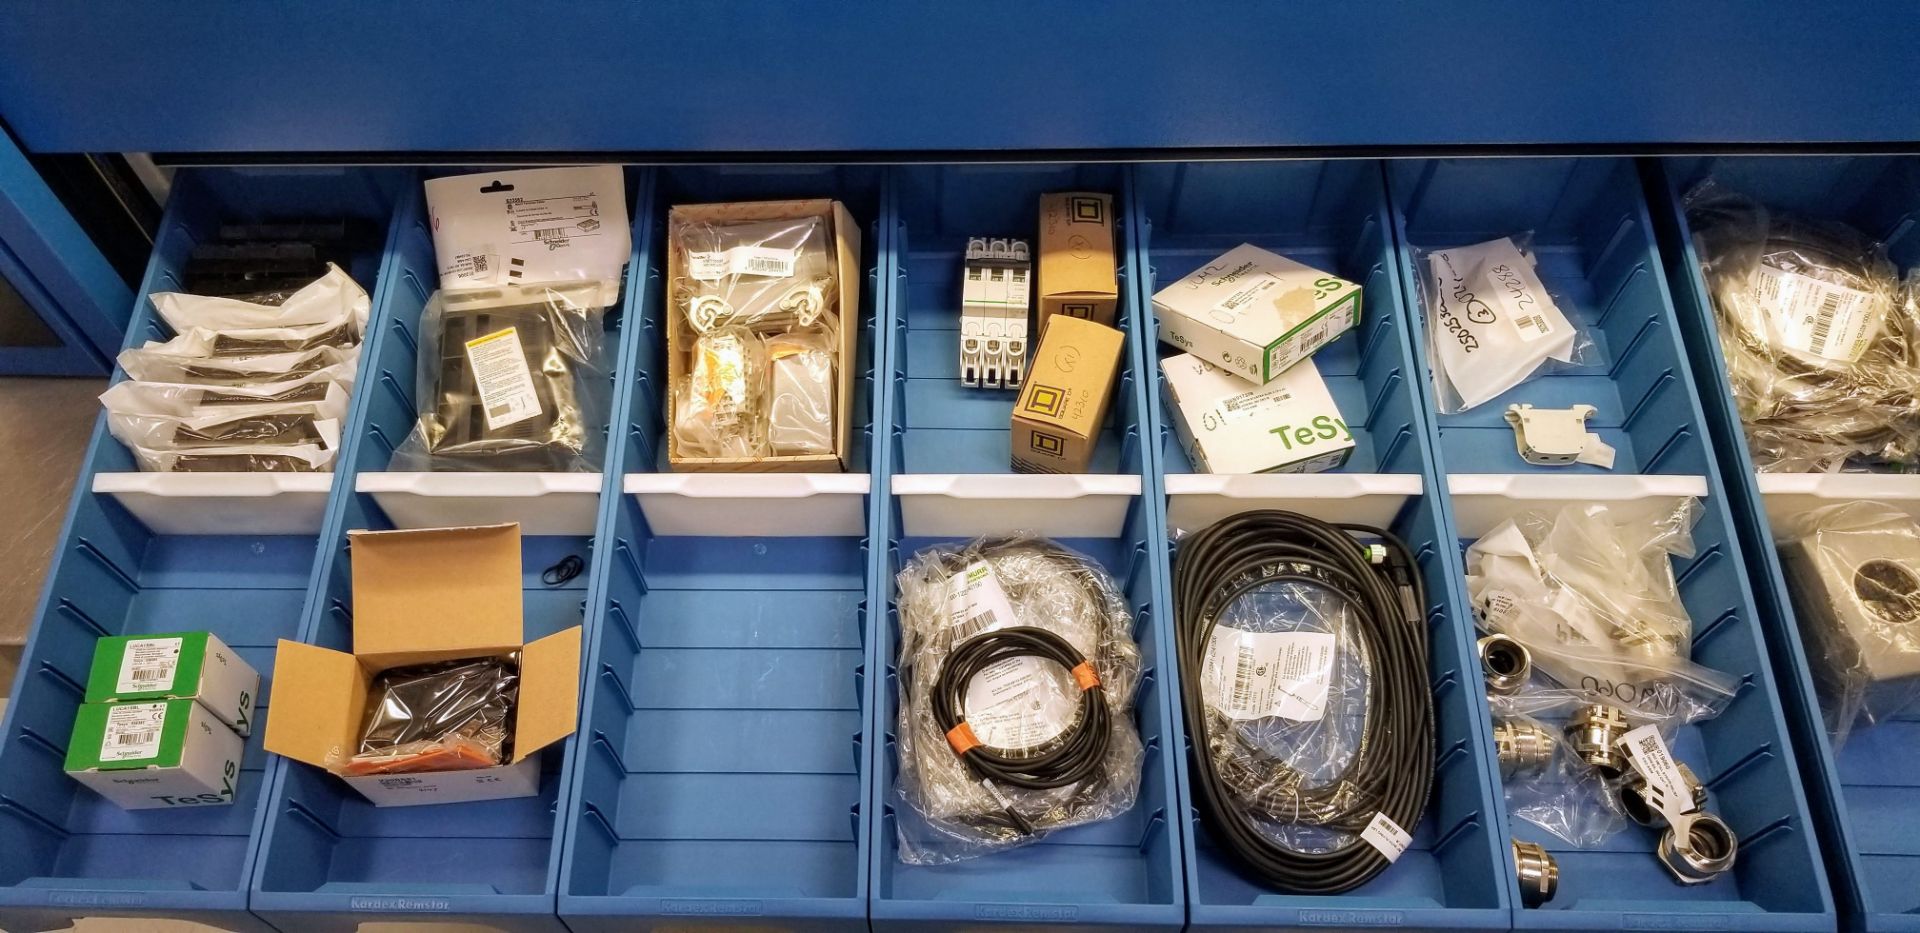 LOT - CONTENTS OF 36 SHELVES INCLUDING: MOTOR CABLES, HYBRID CABLES, PLUGS, INPUT CARDS, MODULES, - Image 55 of 100